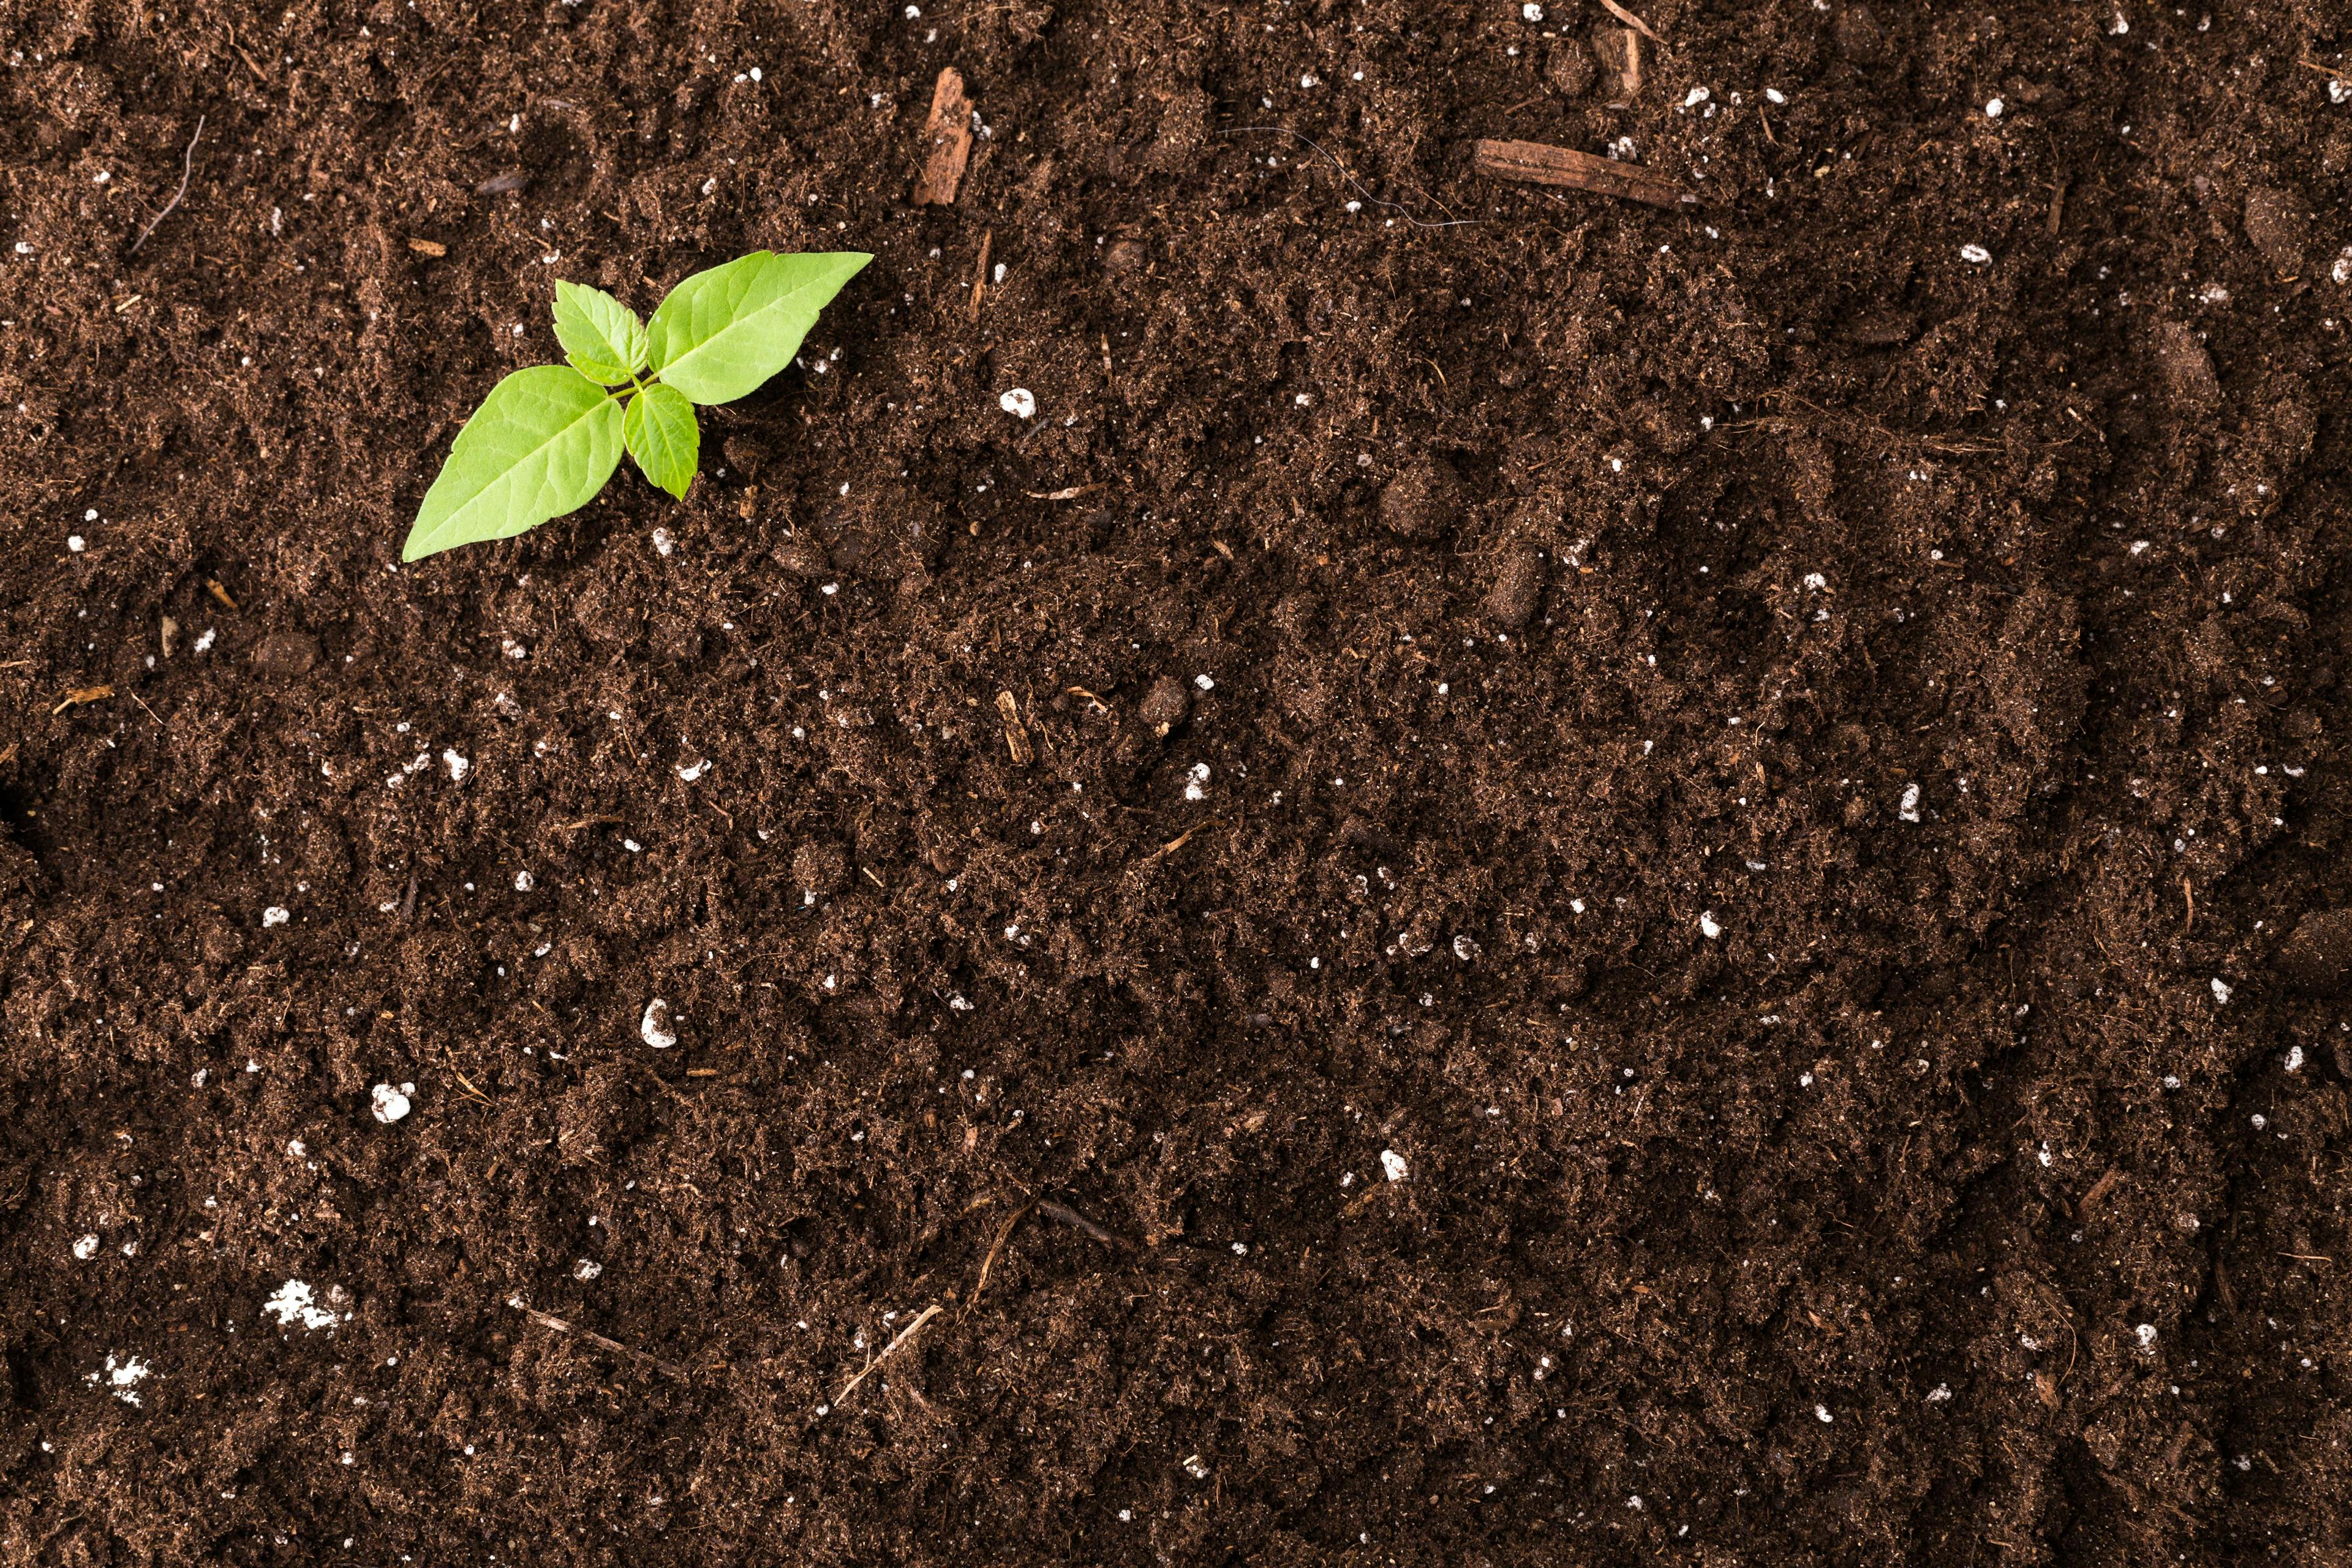 Seedling green plant surface top view textured background | Image Credit: © fotofabrika - stock.adobe.com